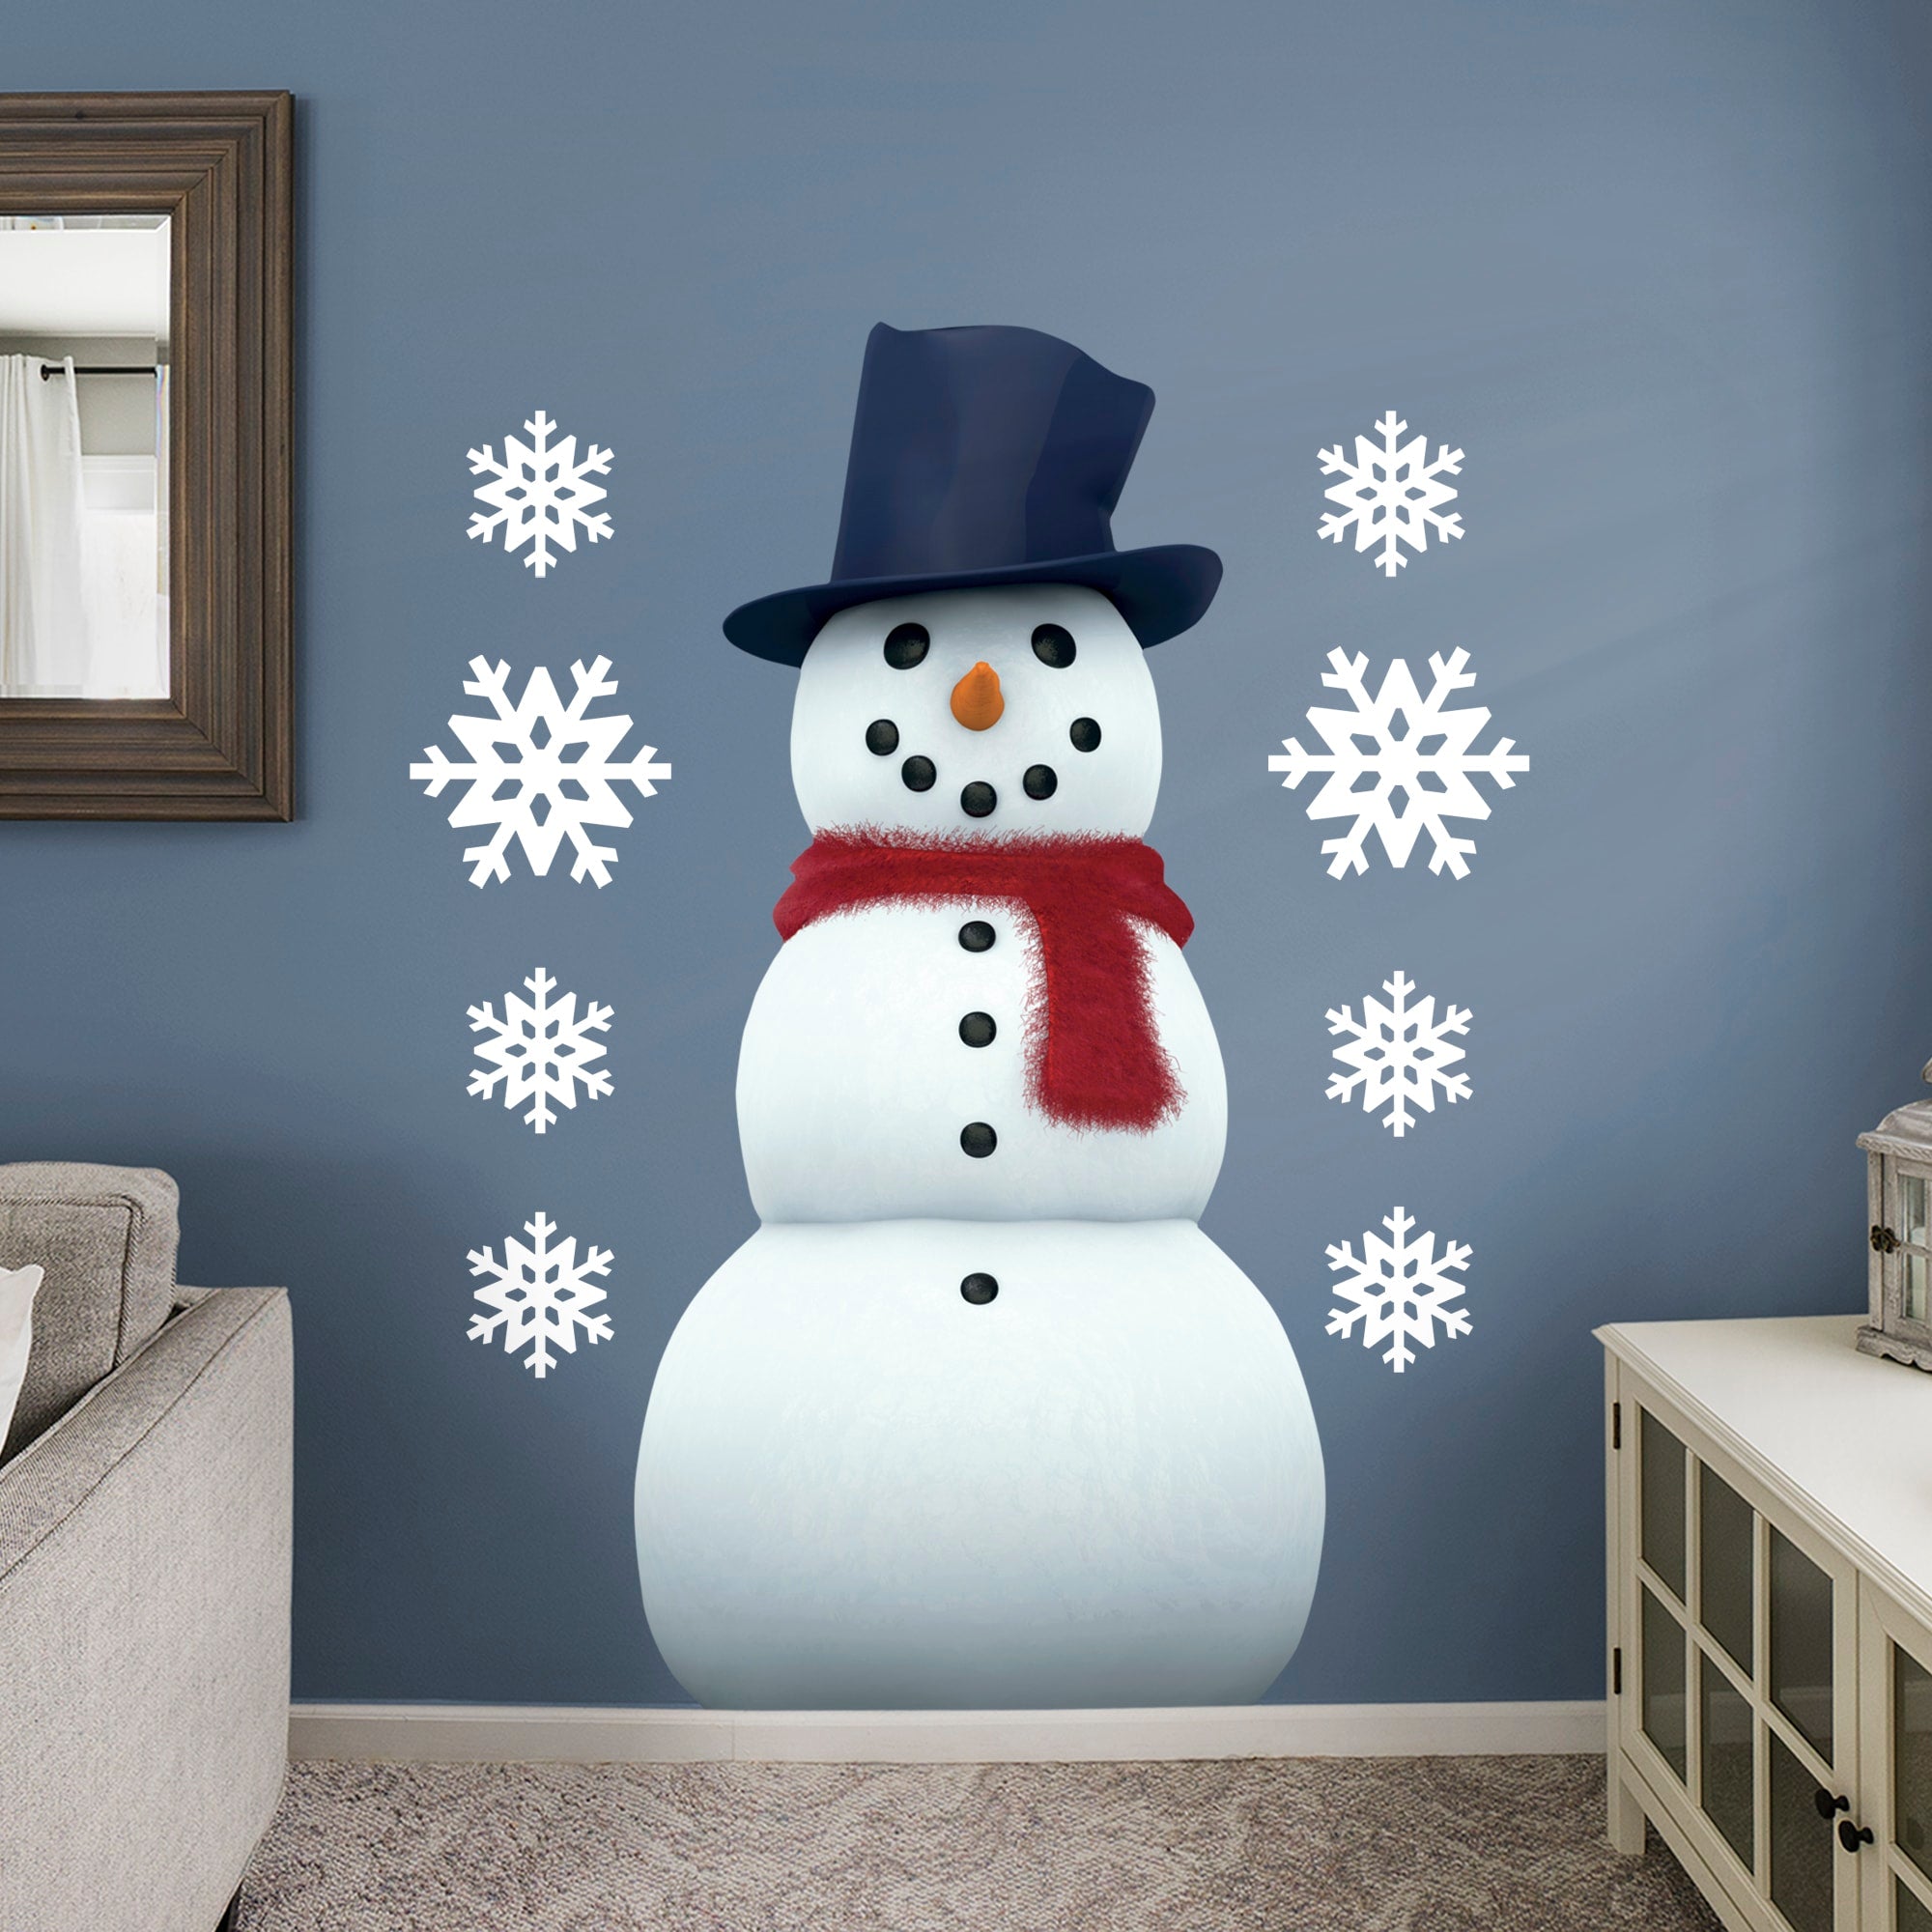 Snowman - Removable Vinyl Decal Life-Size Character + 8 Licensed Decals (31"W x 68"H) by Fathead